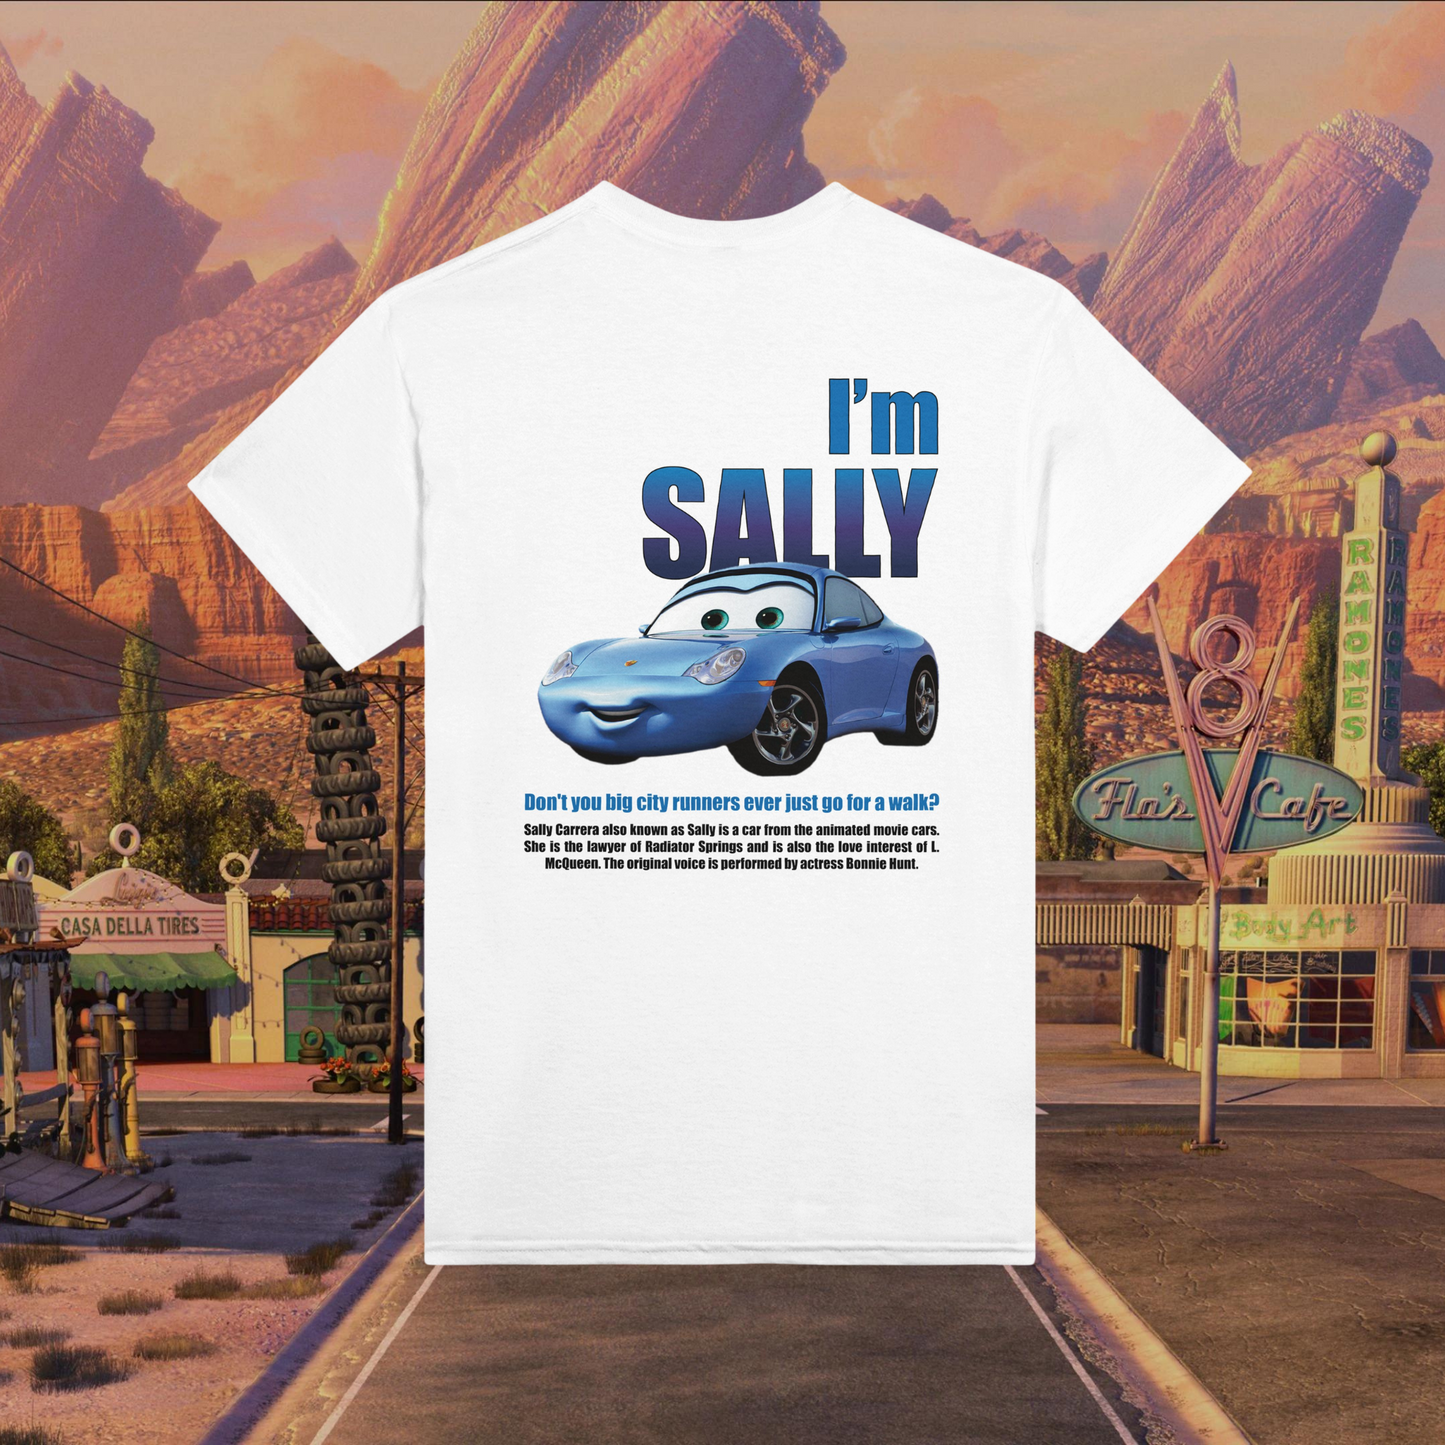 Cars Couple T-shirts: L. McQueen and Sally Matching Shirts for Fans